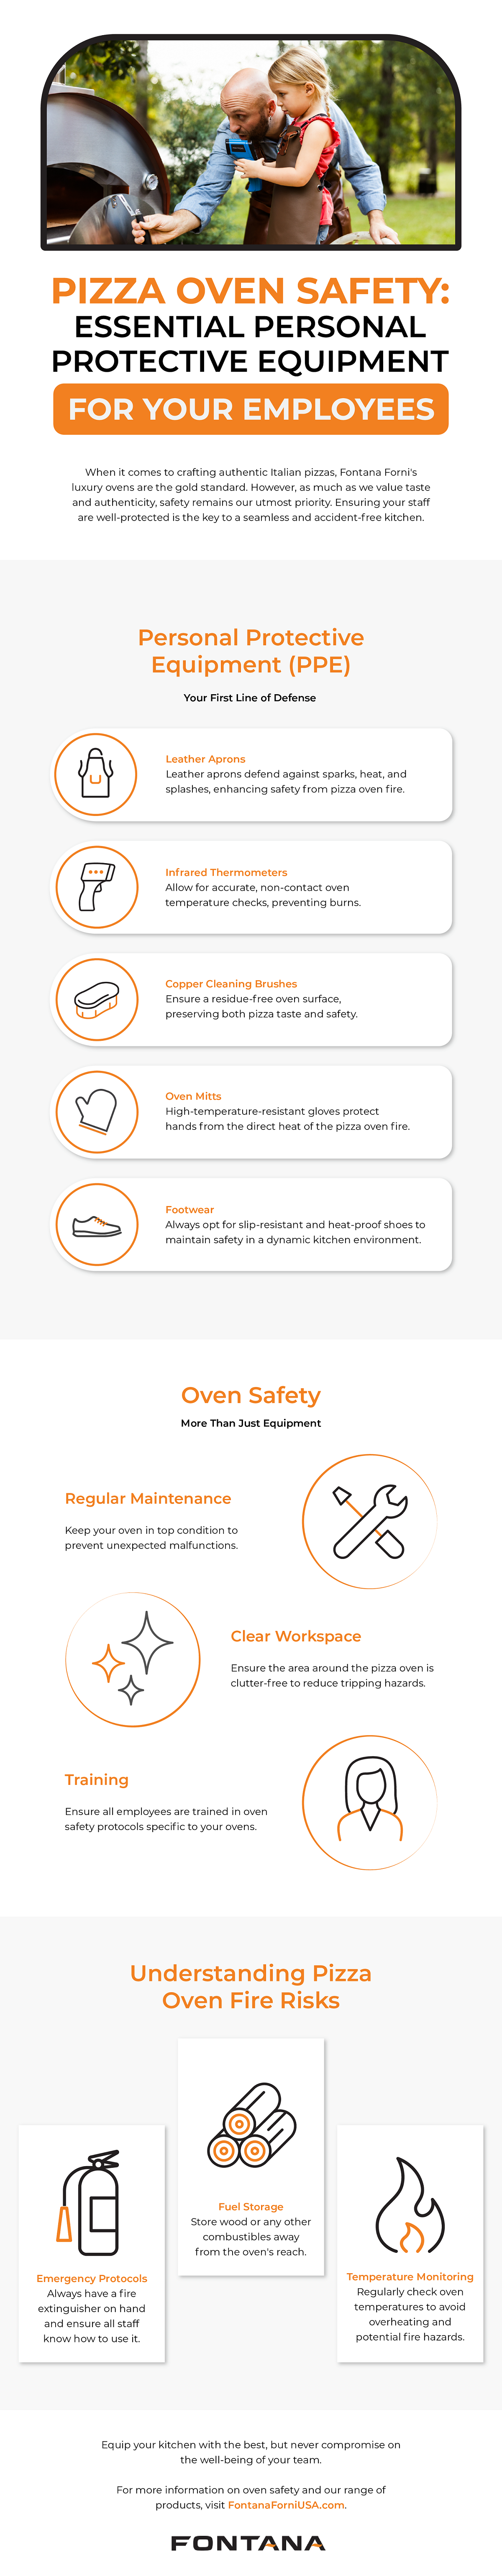 Pizza Oven Safety: Essential Personal Protective Equipment for Your Employees